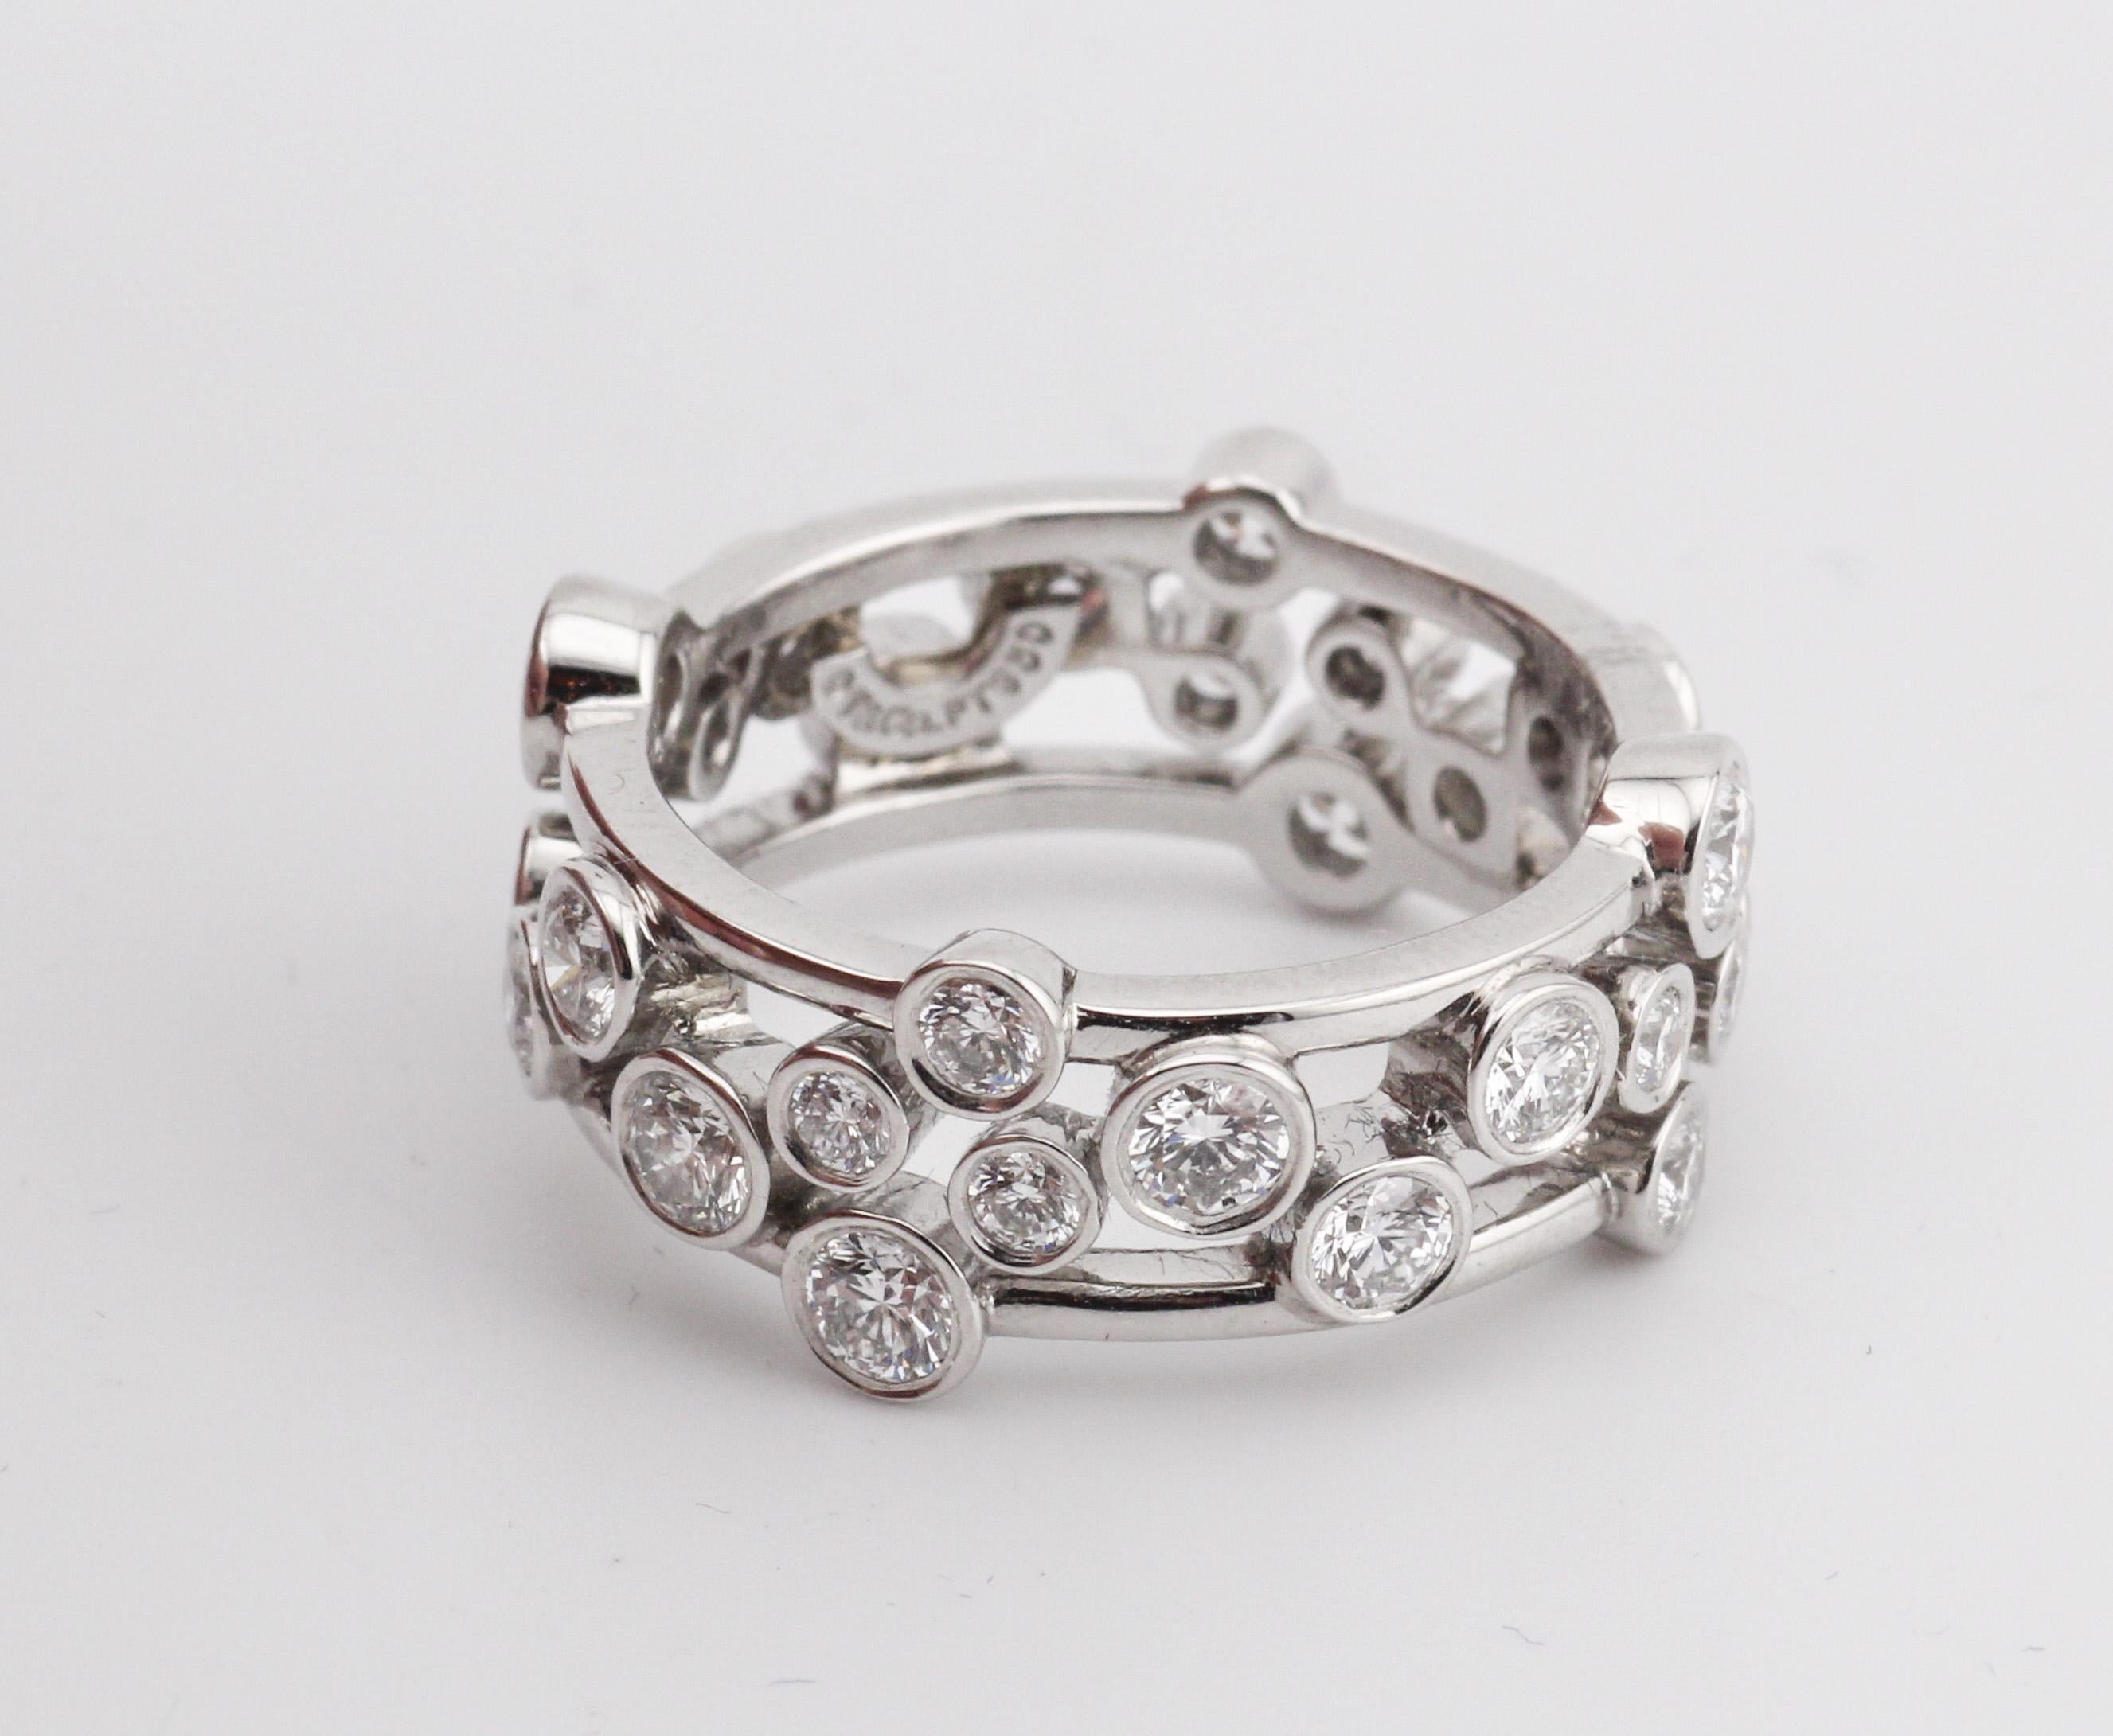 Tiffany & Co. Diamond and Platinum Bubbles Band Ring Size 5.25 In Good Condition For Sale In Bellmore, NY